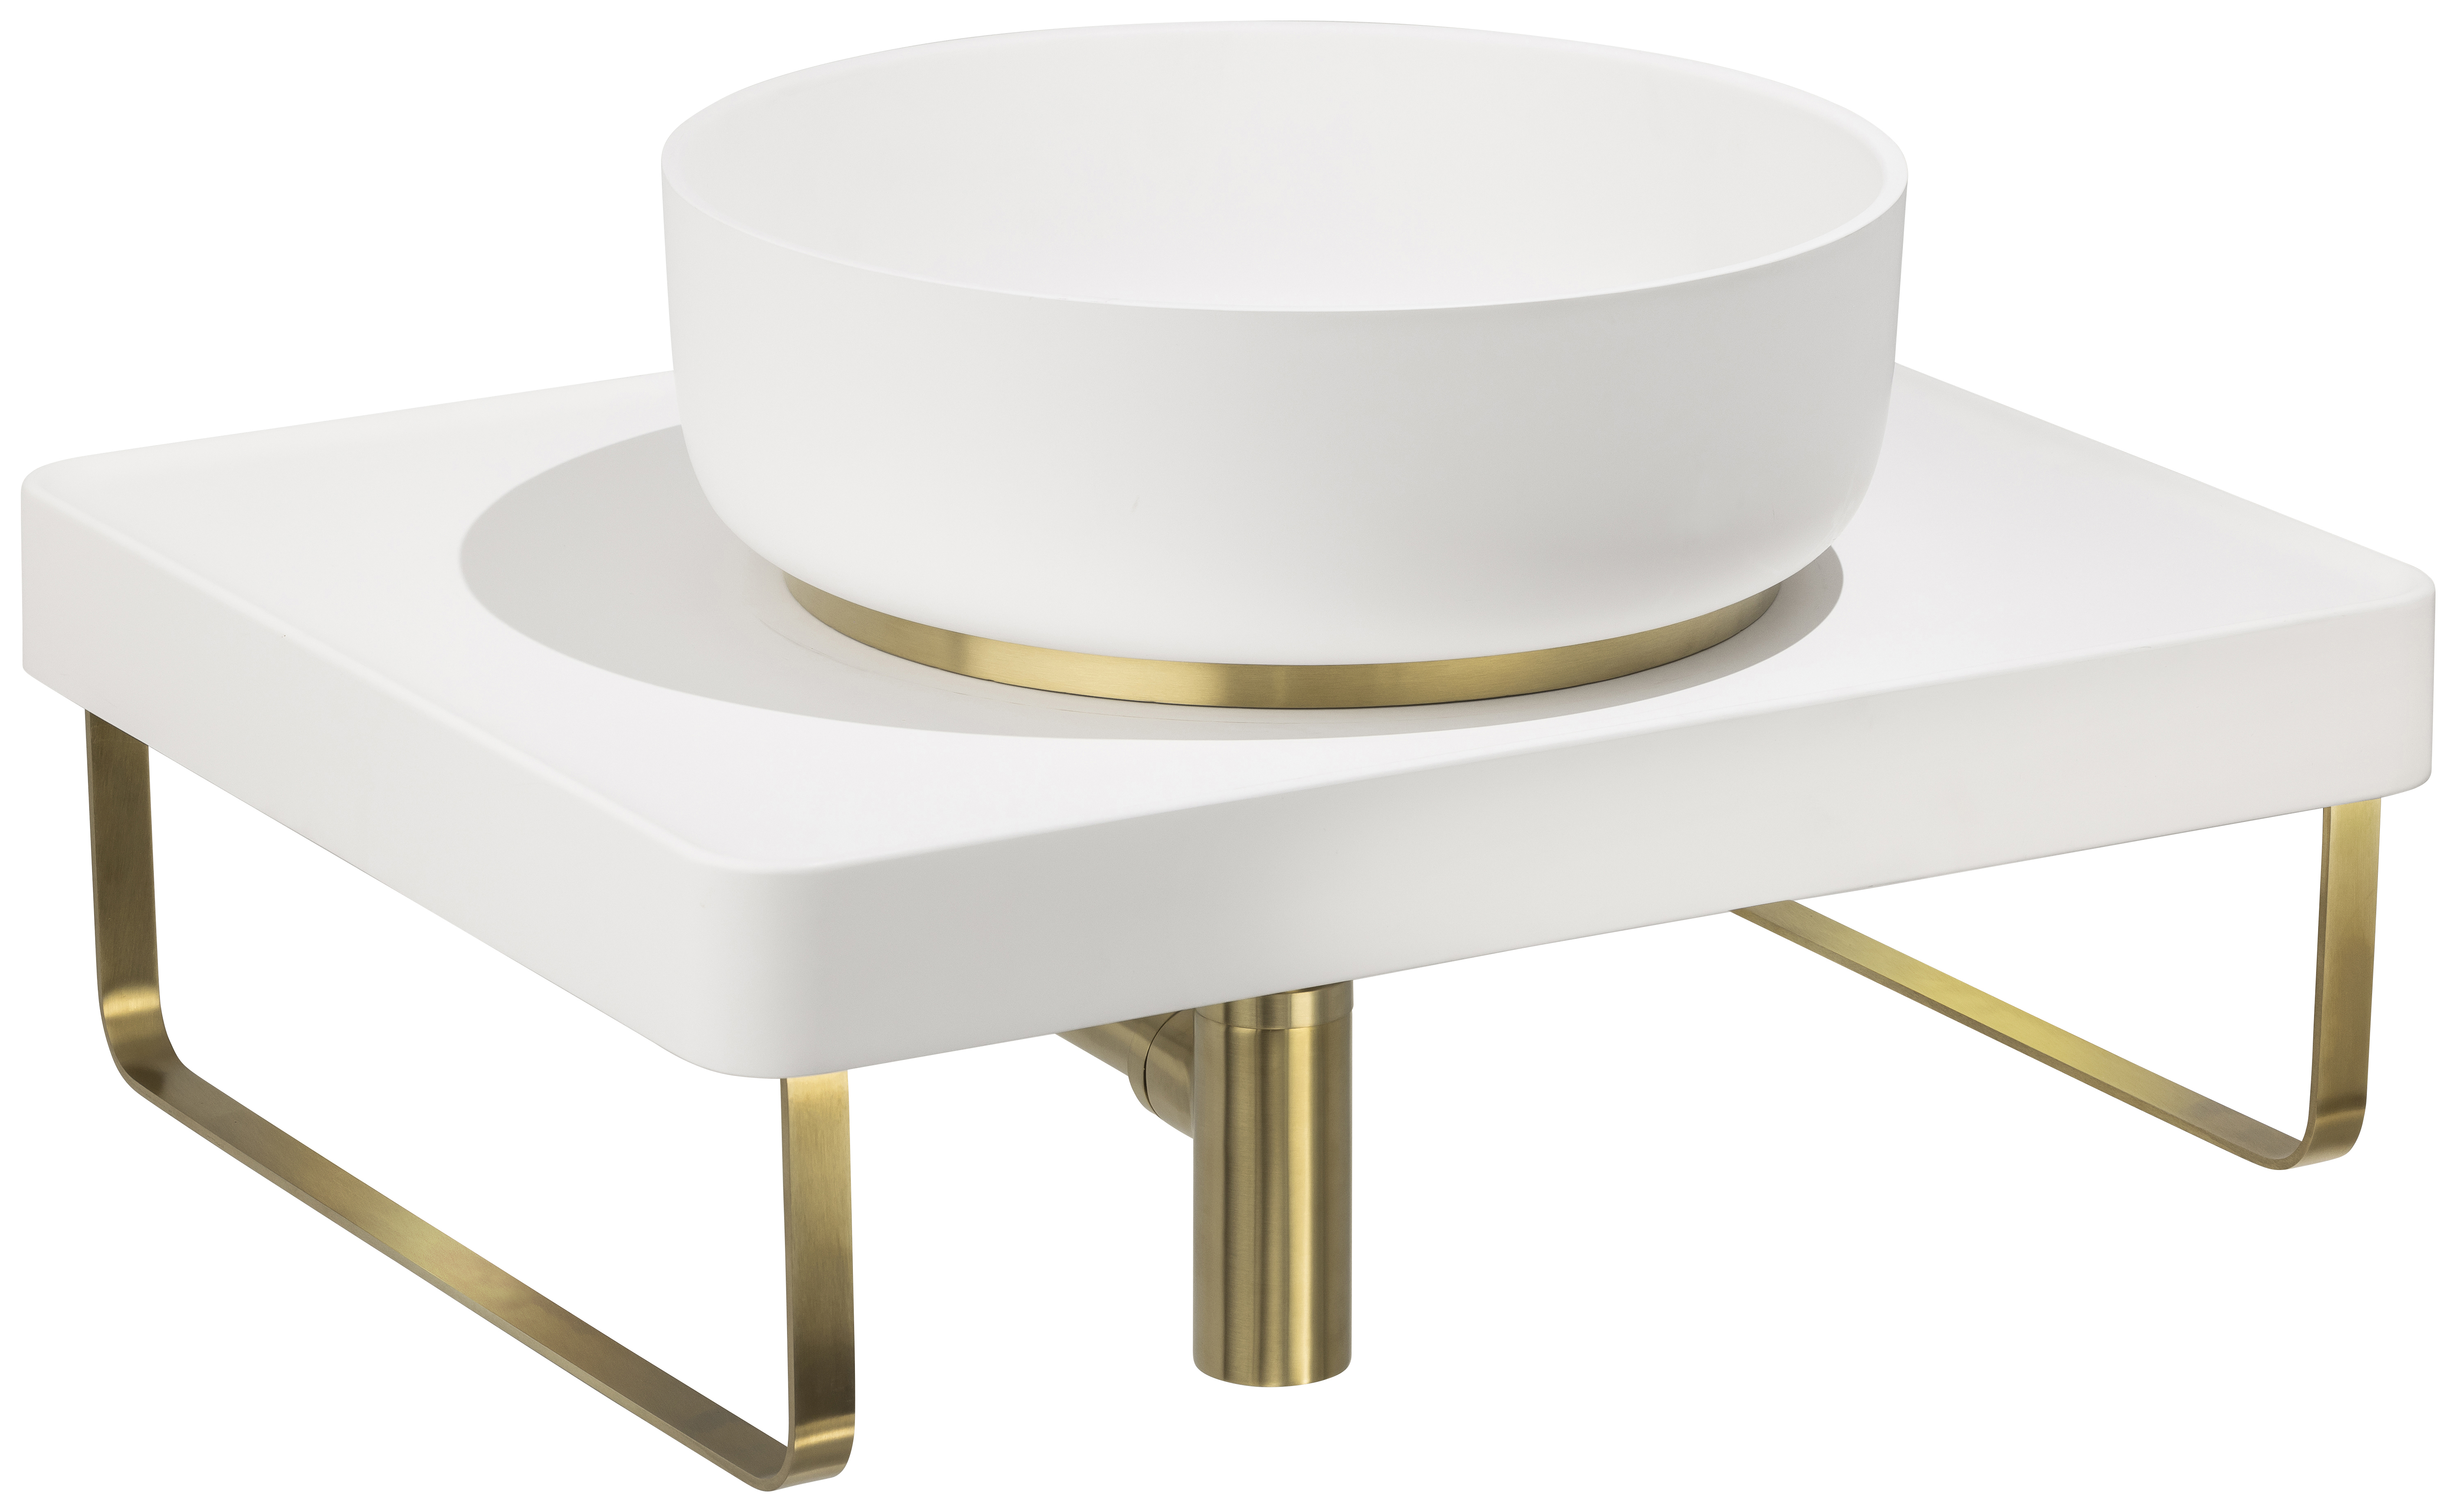 Abode Cava Round Countertop White Basin with White Worktop, Basin Plinth, Brushed Brass Wastes & Towel Rail